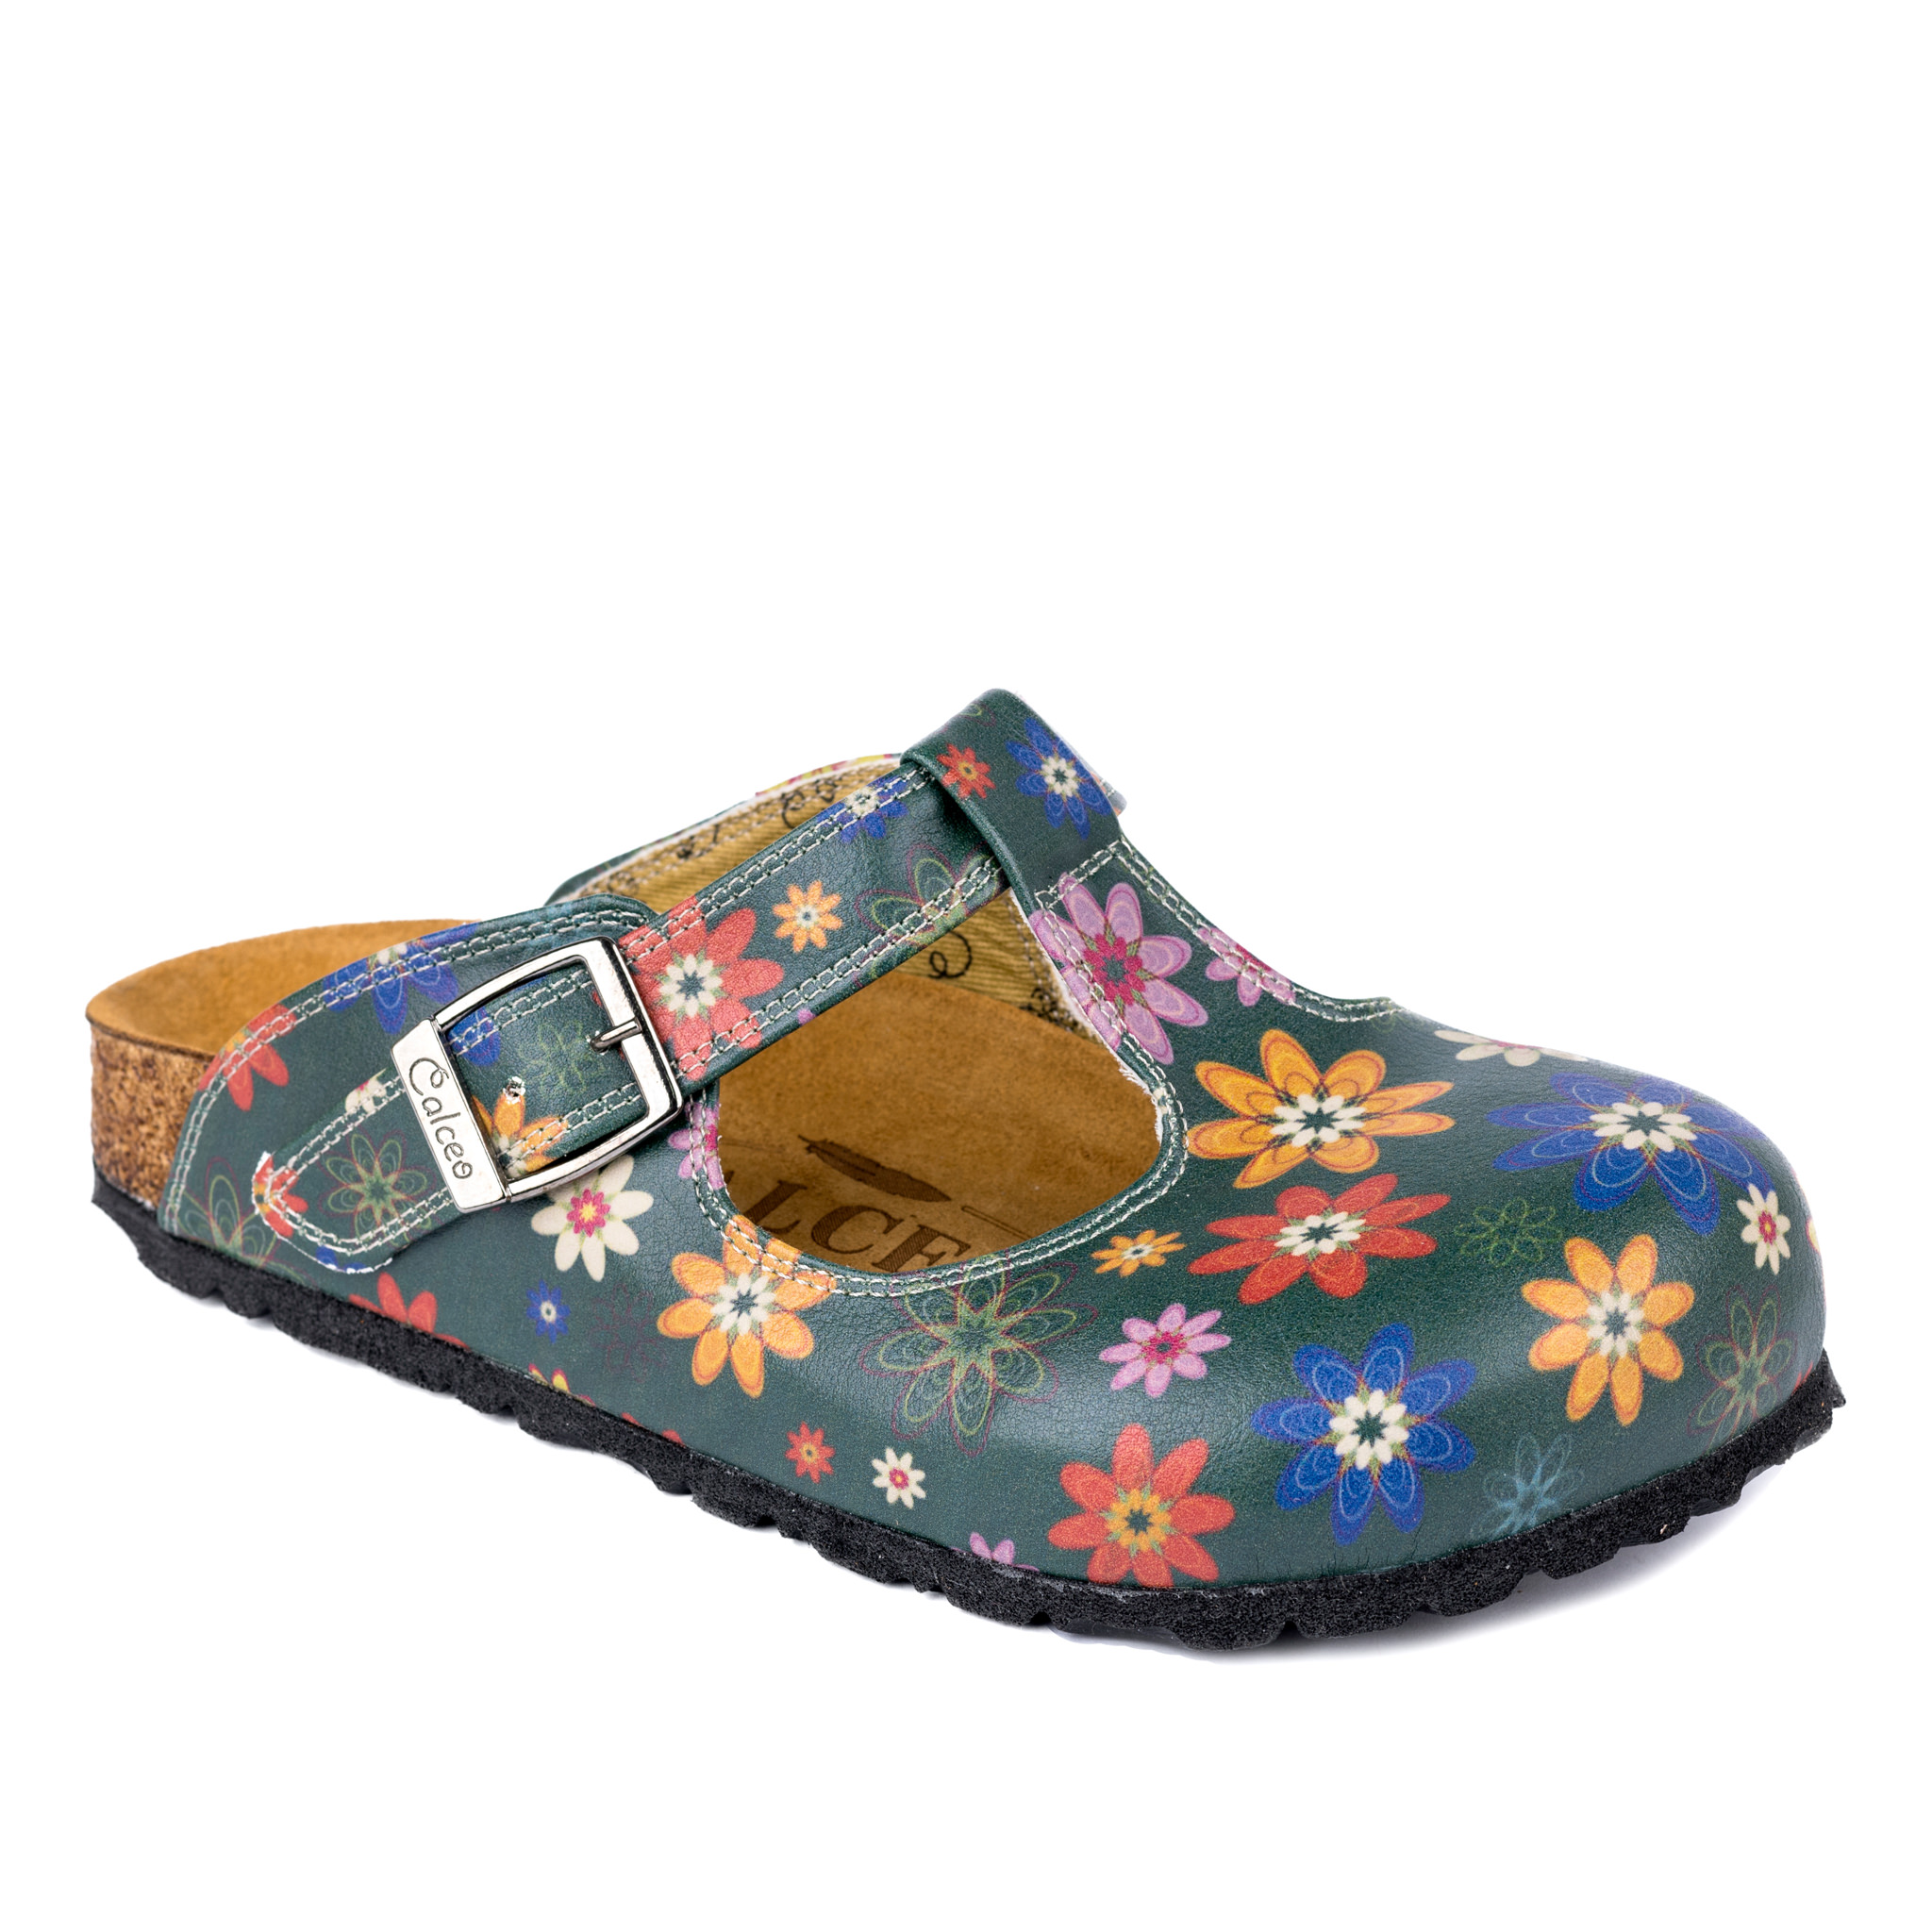 Patterned women clogs A043 - FLORAL - GREEN